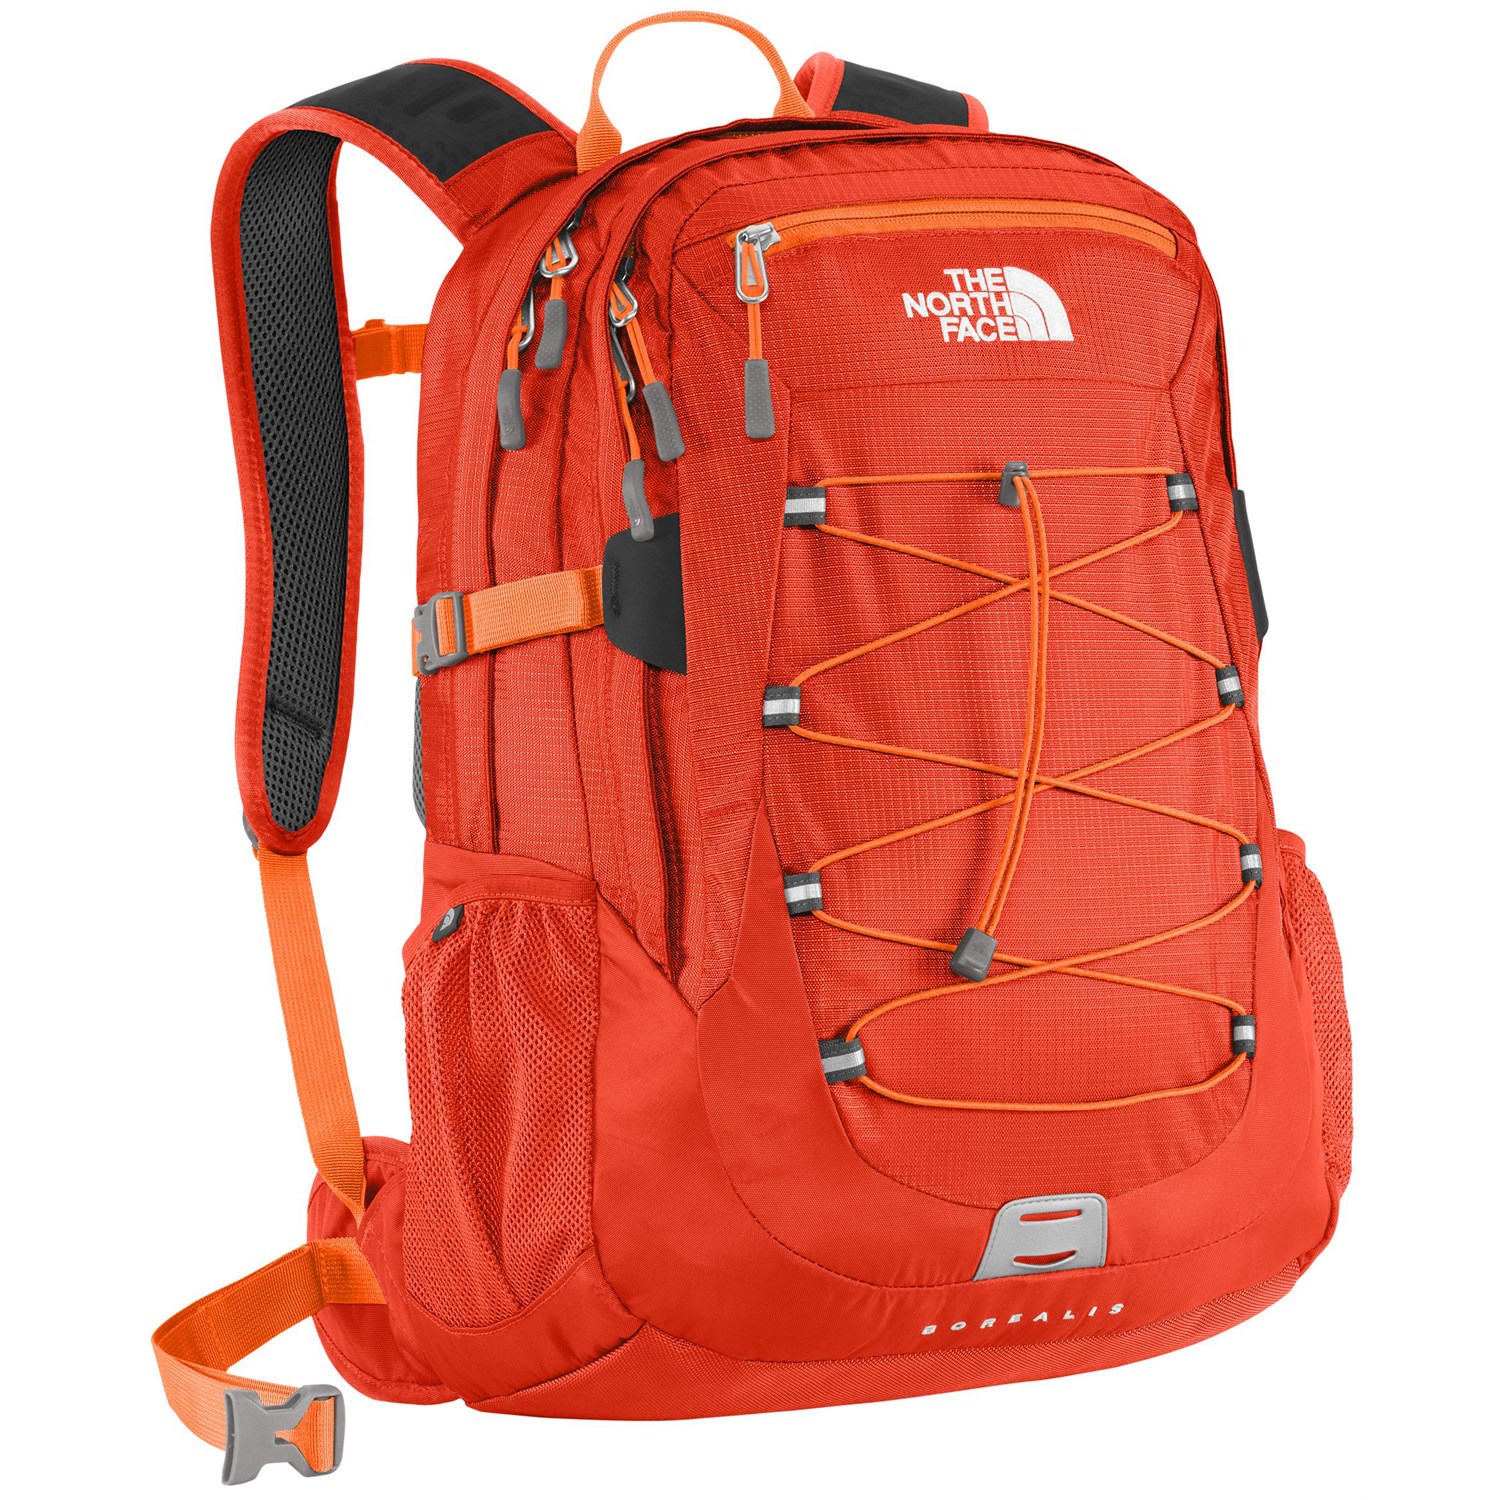 The North Face Borealis Backpack | evo